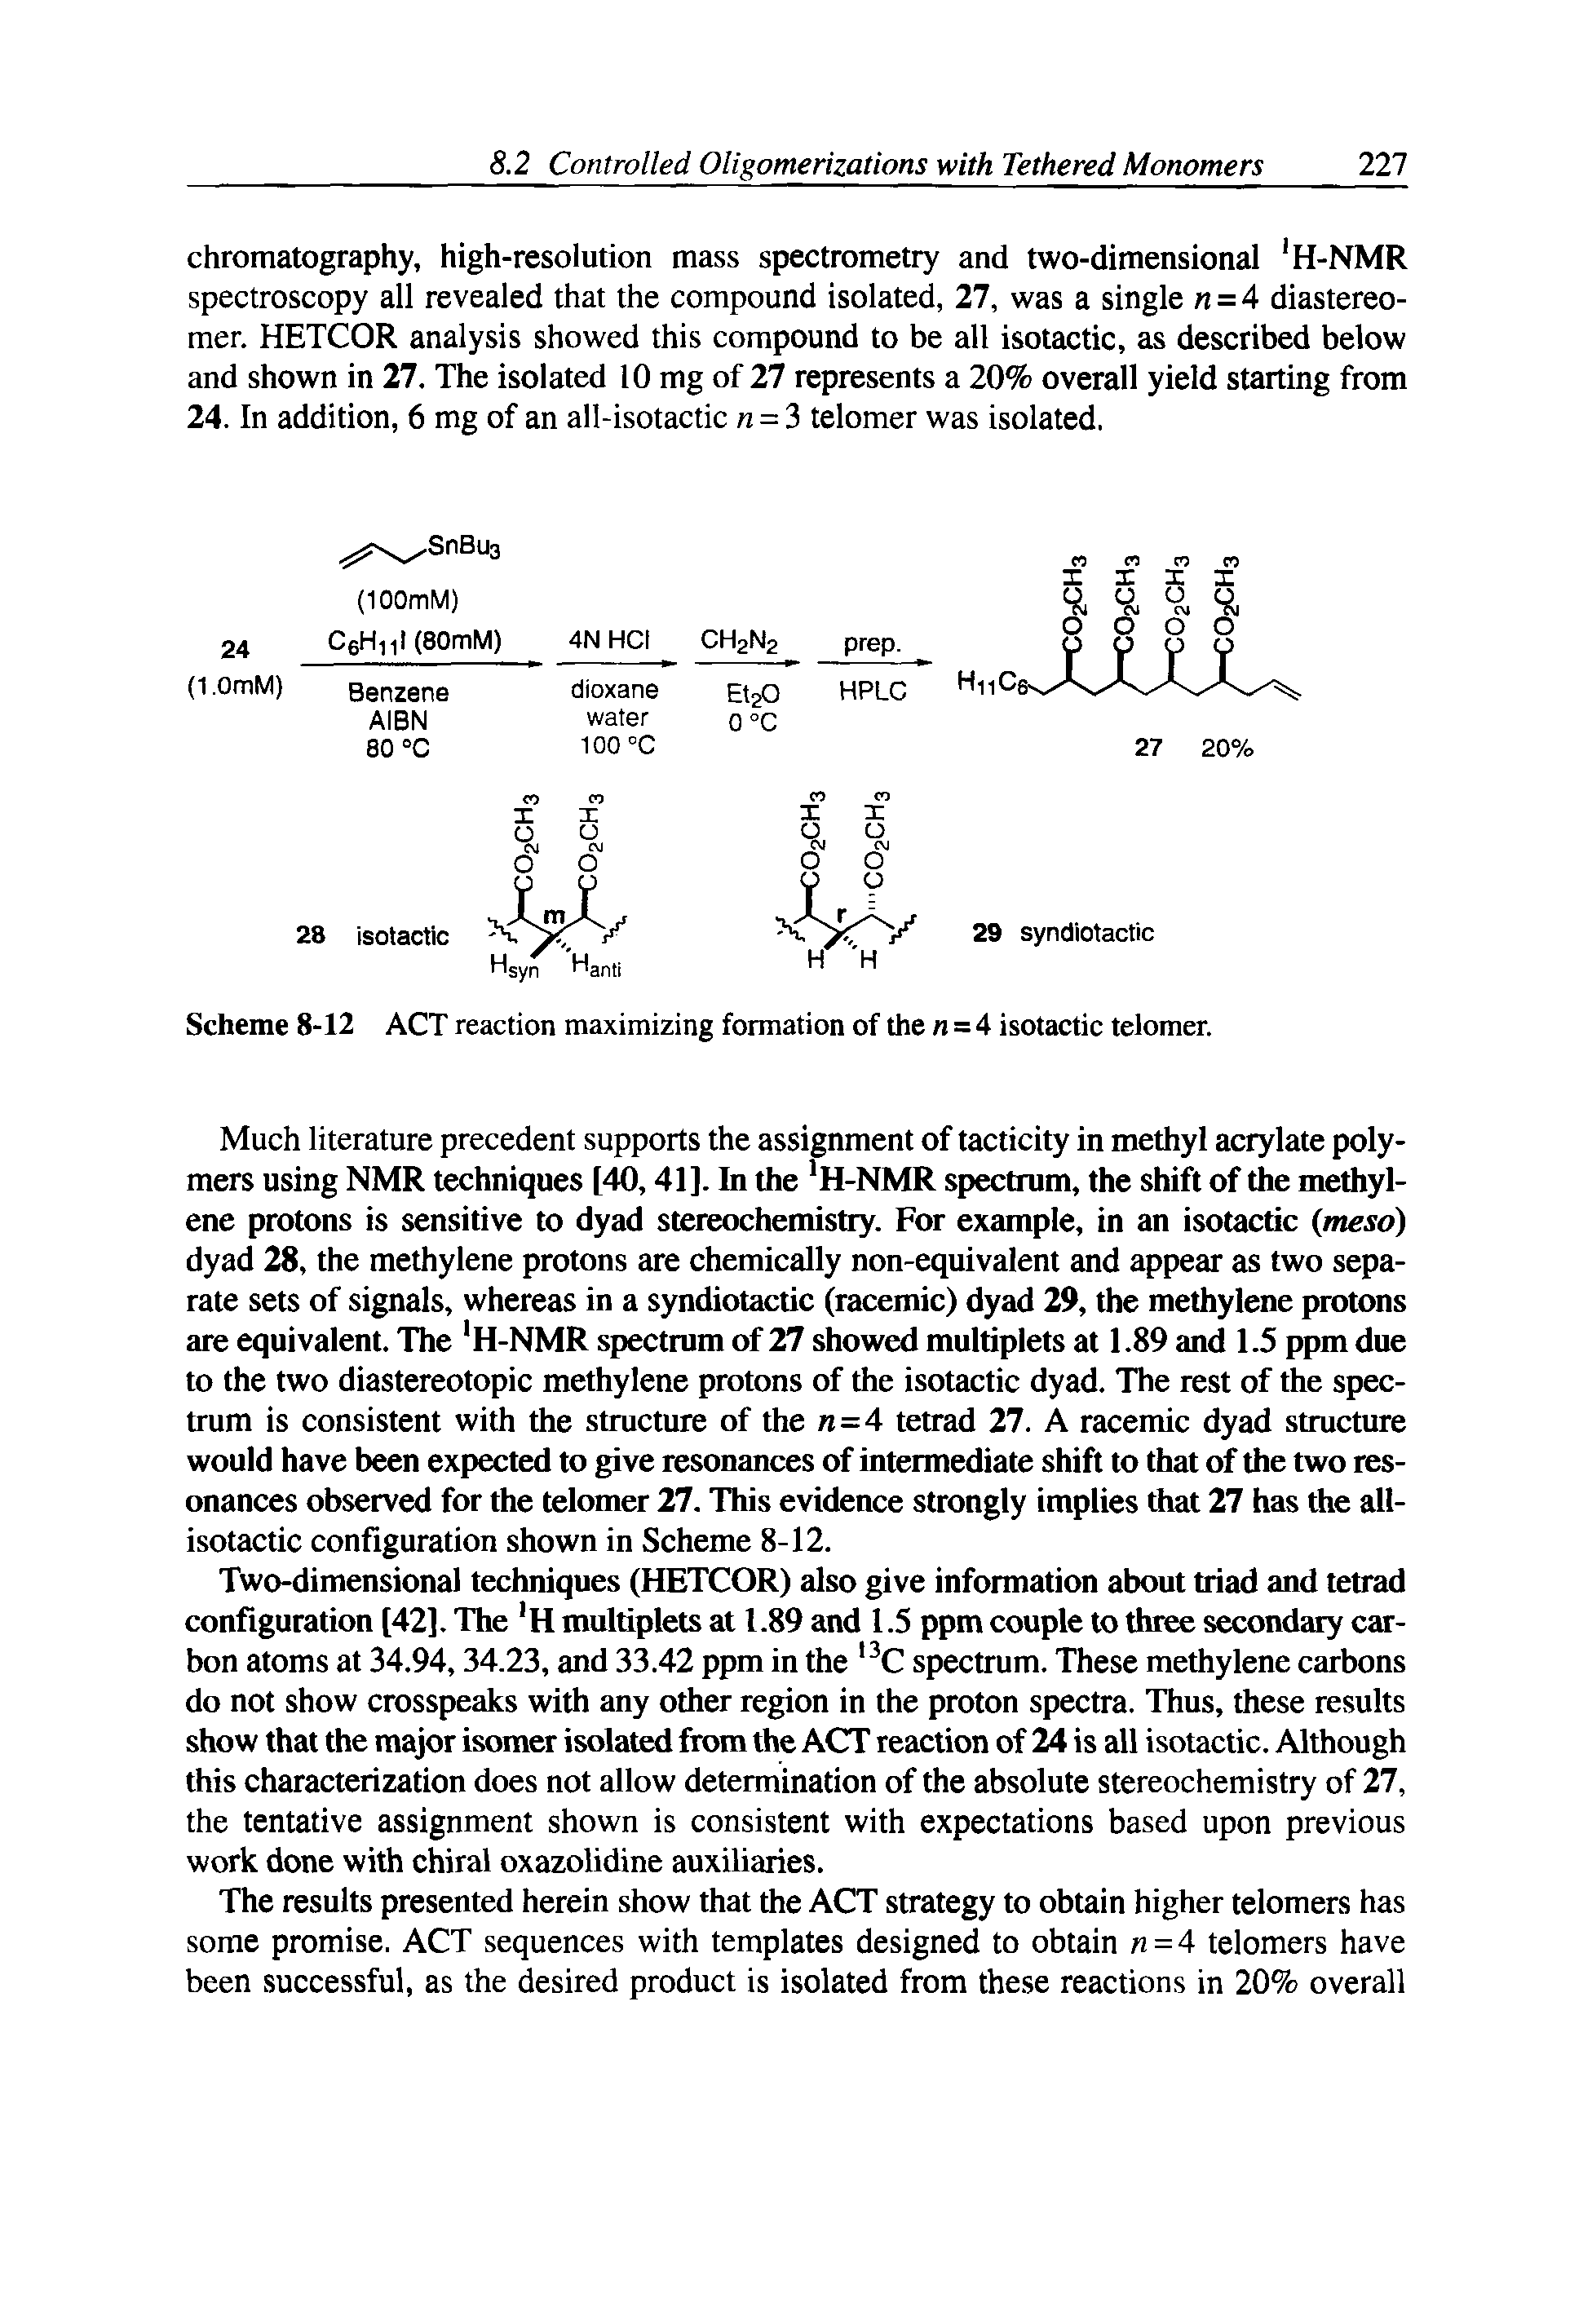 Scheme 8-12 ACT reaction maximizing formation of the = 4 isotactic telomer.